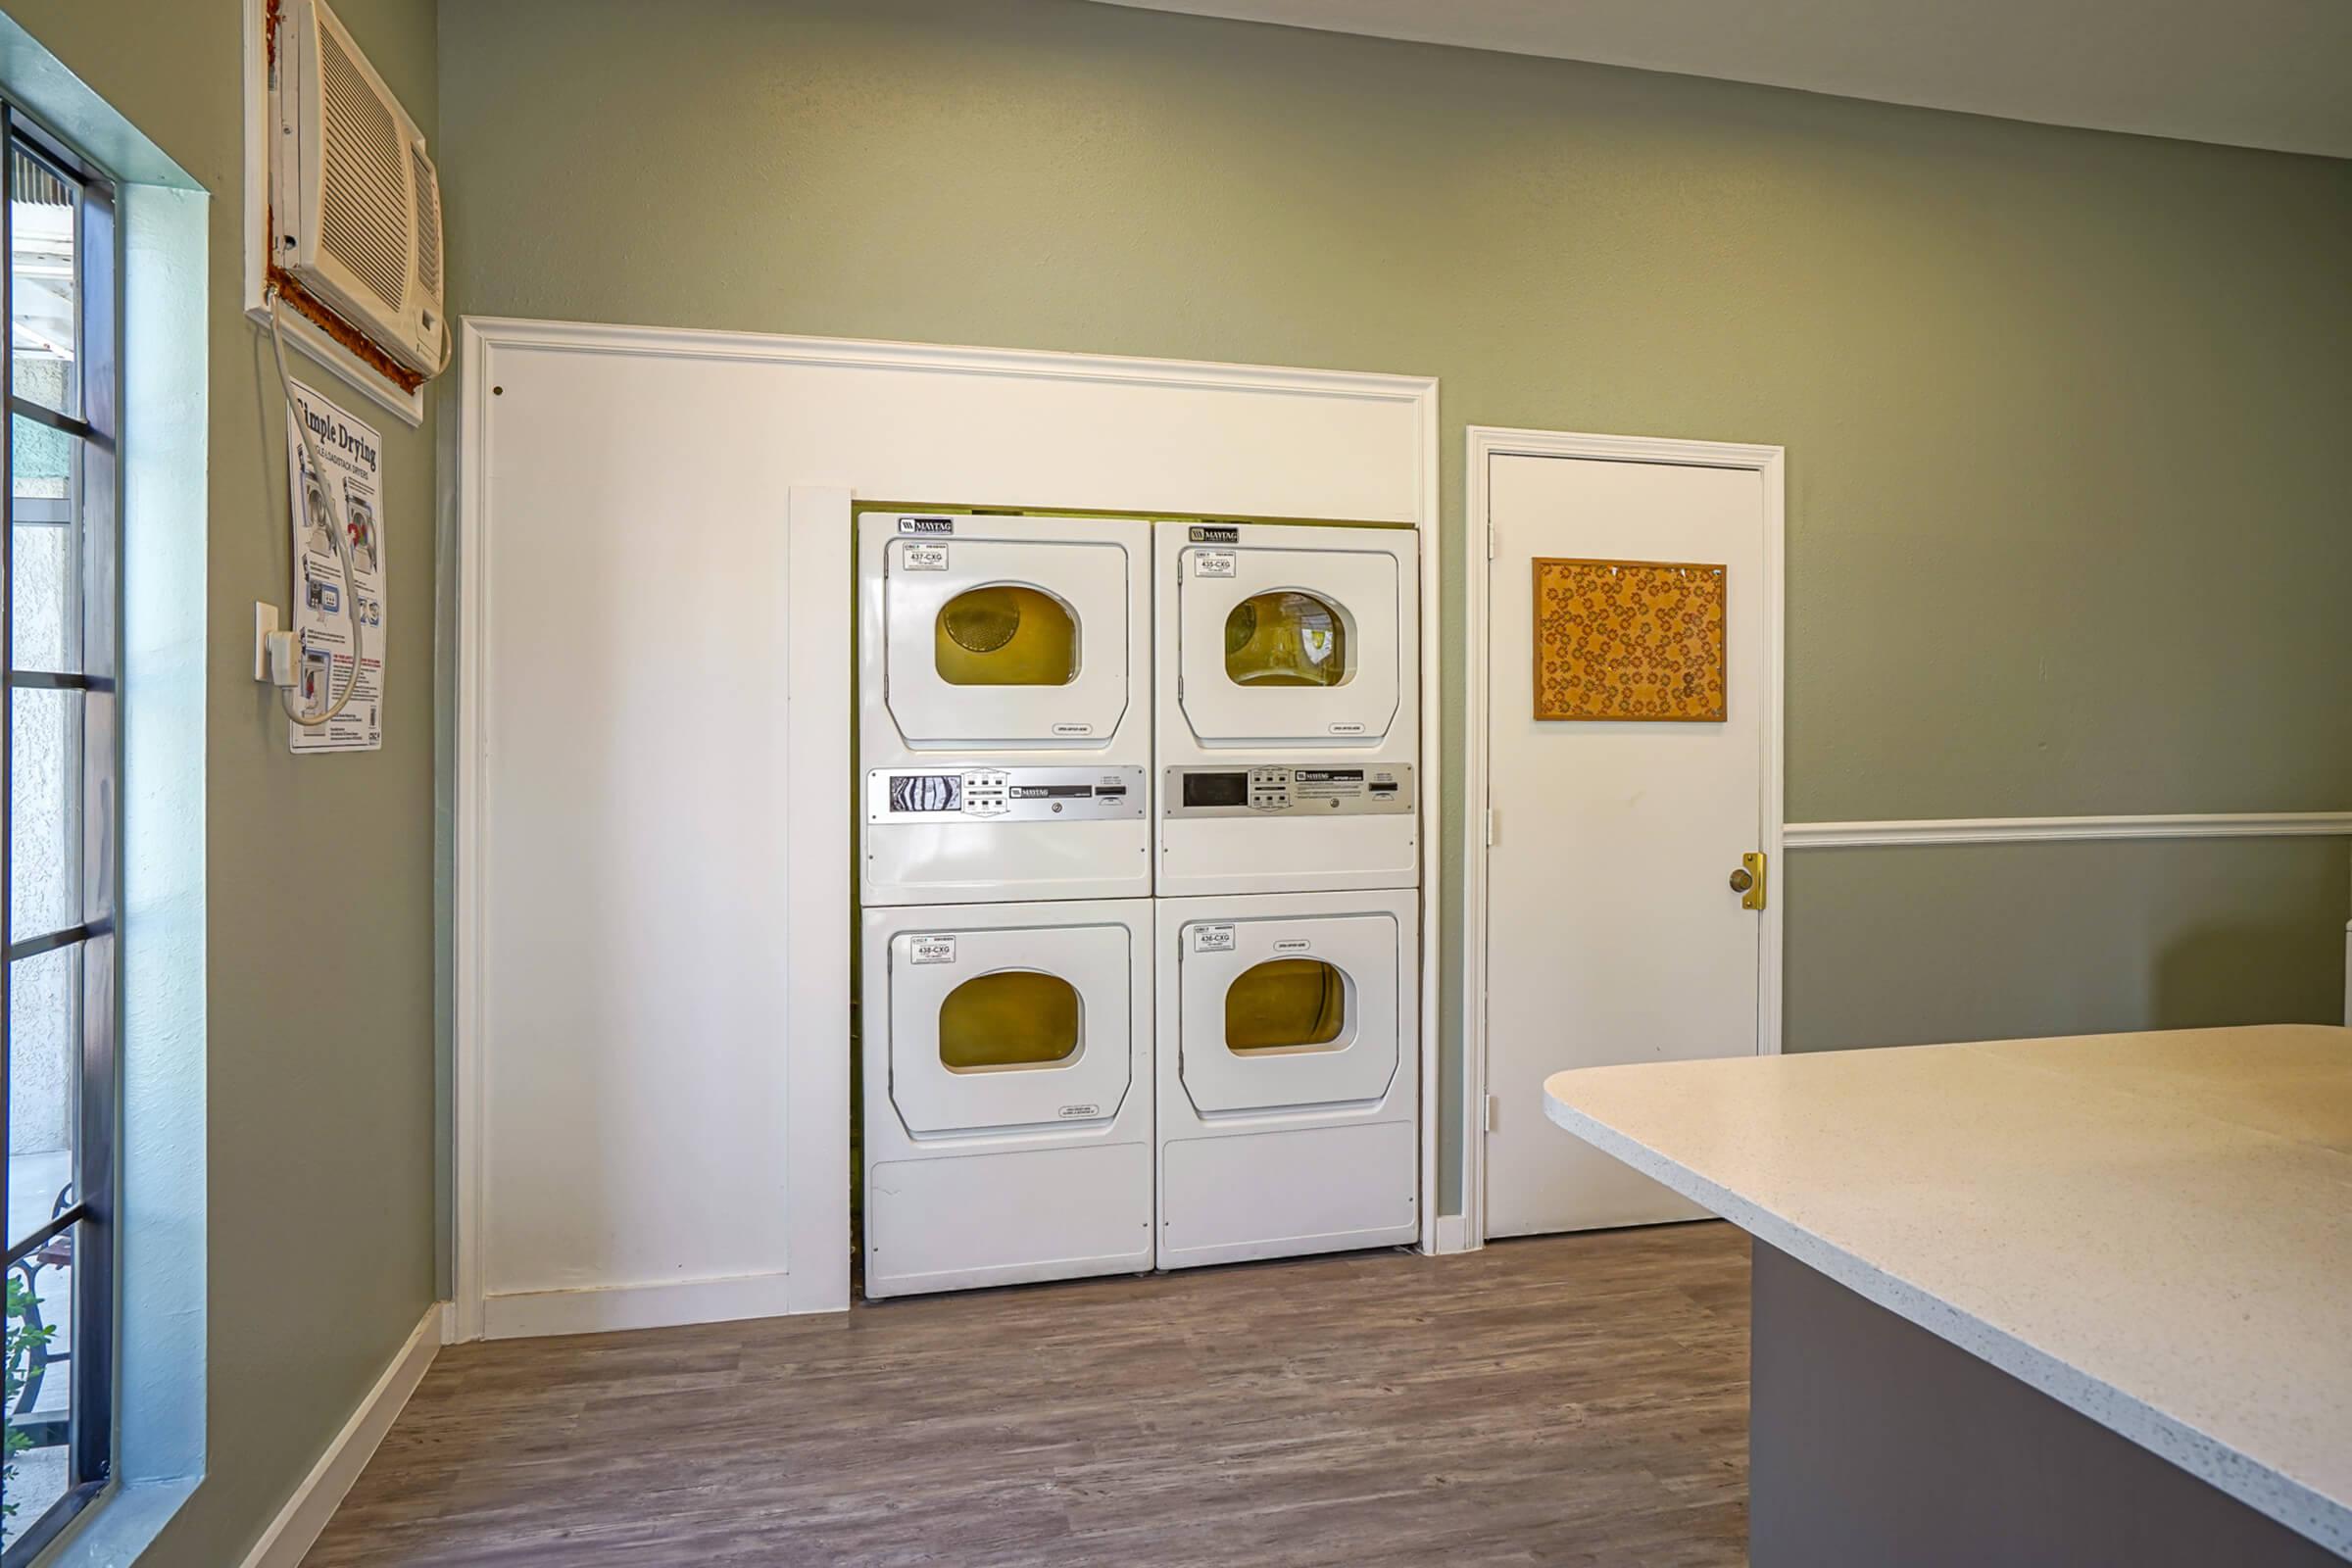 Well-Maintained Laundry Facility - The Overlook Apartments - Albuquerque - New Mexico 